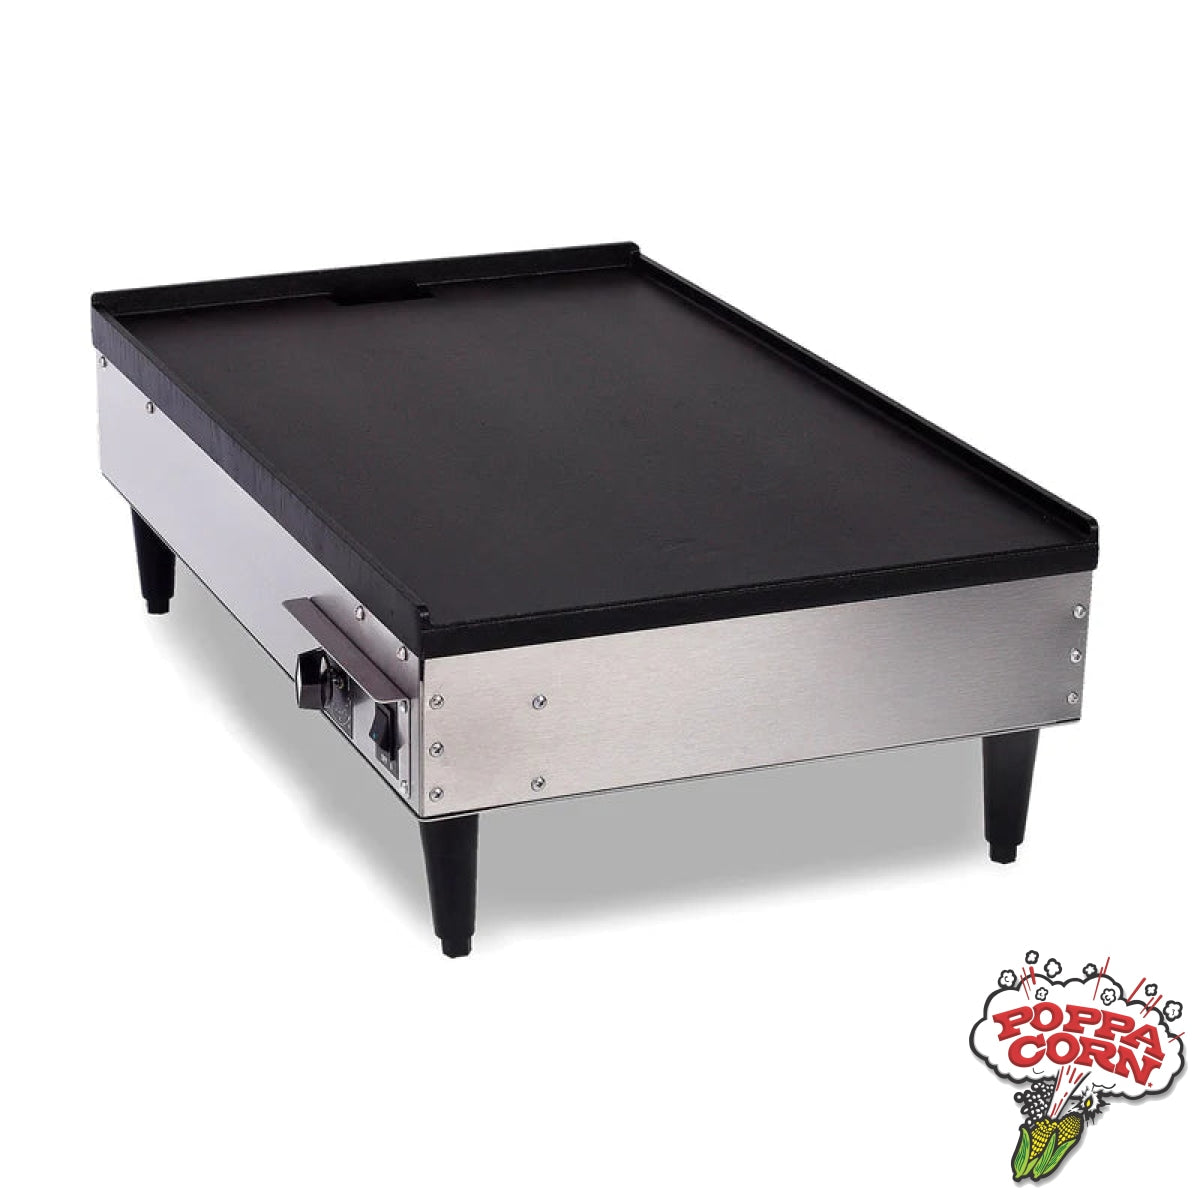 Tabletop Griddle - GM8200 - Poppa Corn Corp